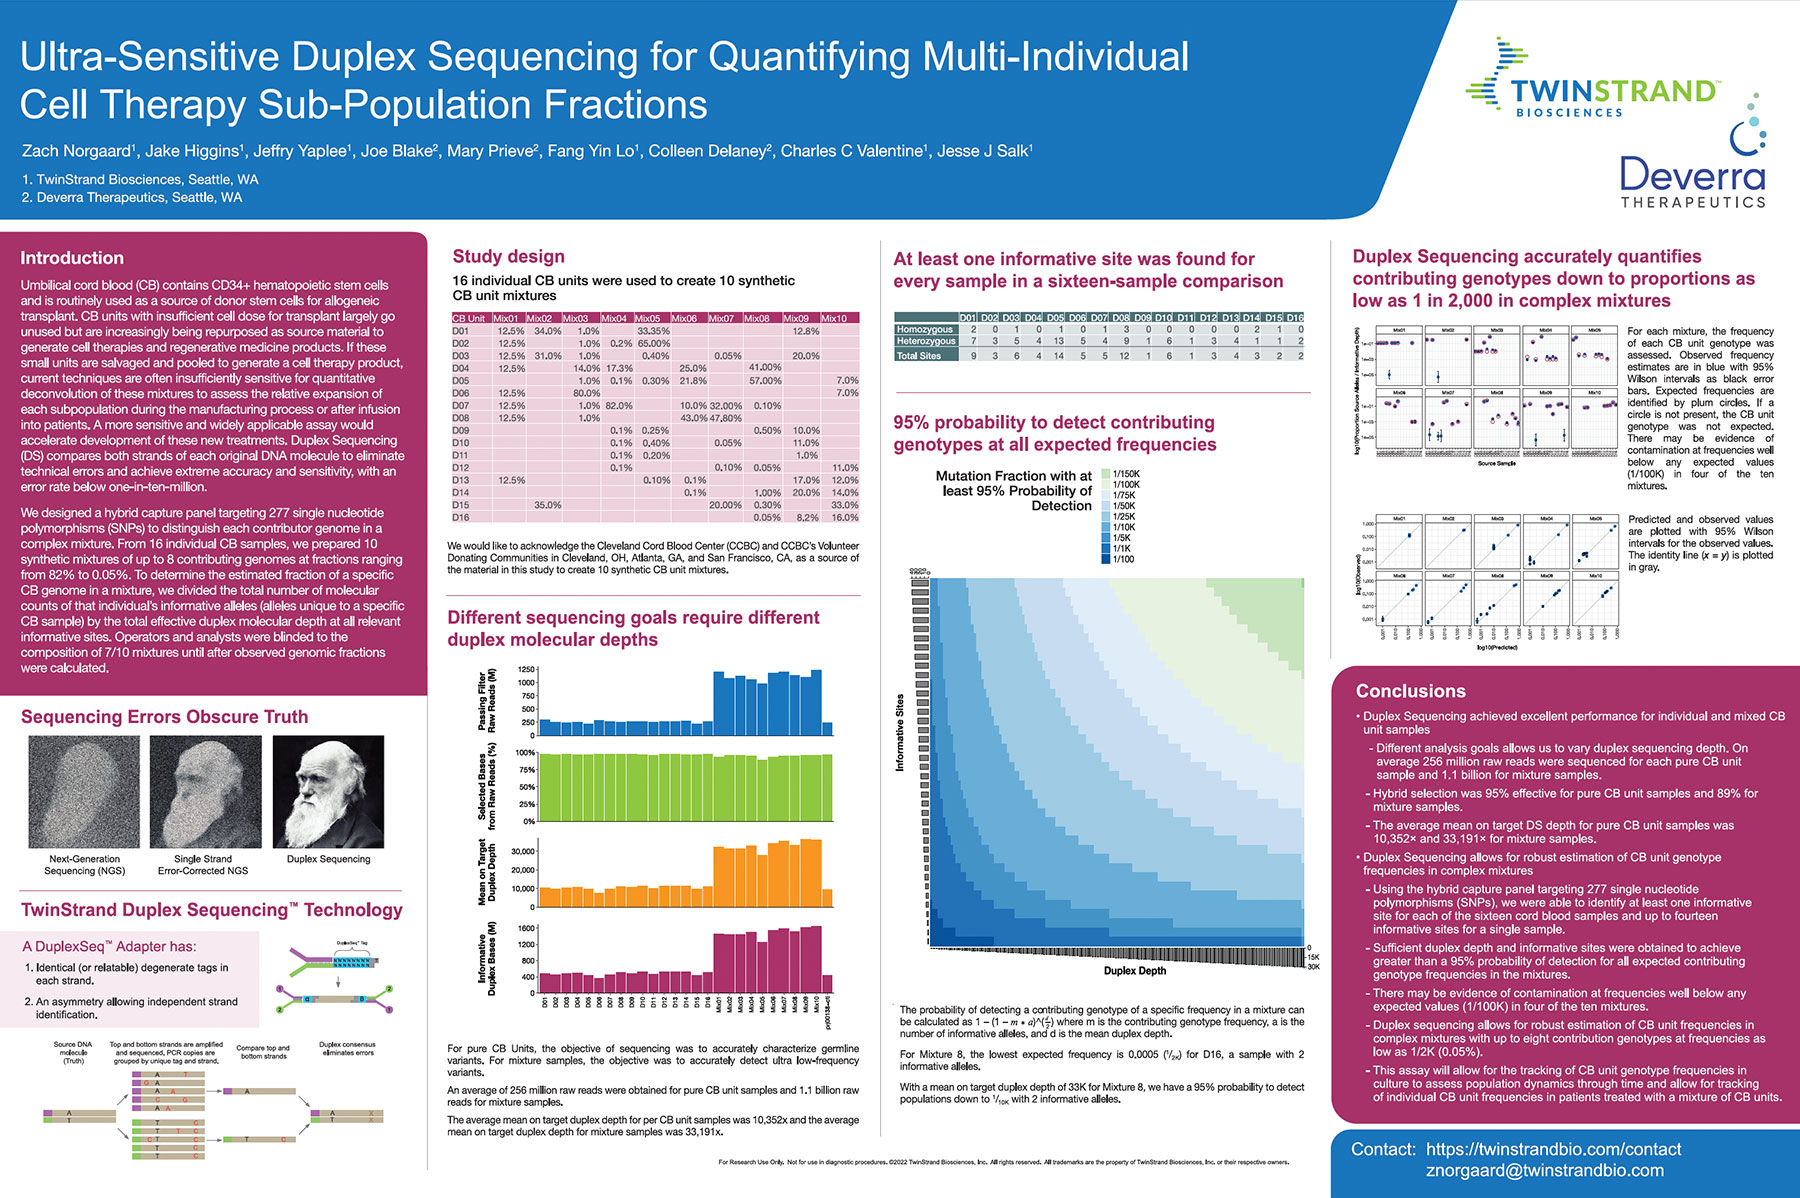 Ultra-Sensitive Duplex Sequencing for Quantifying Multi-Individual Cell Therapy Sub-Population Fractions